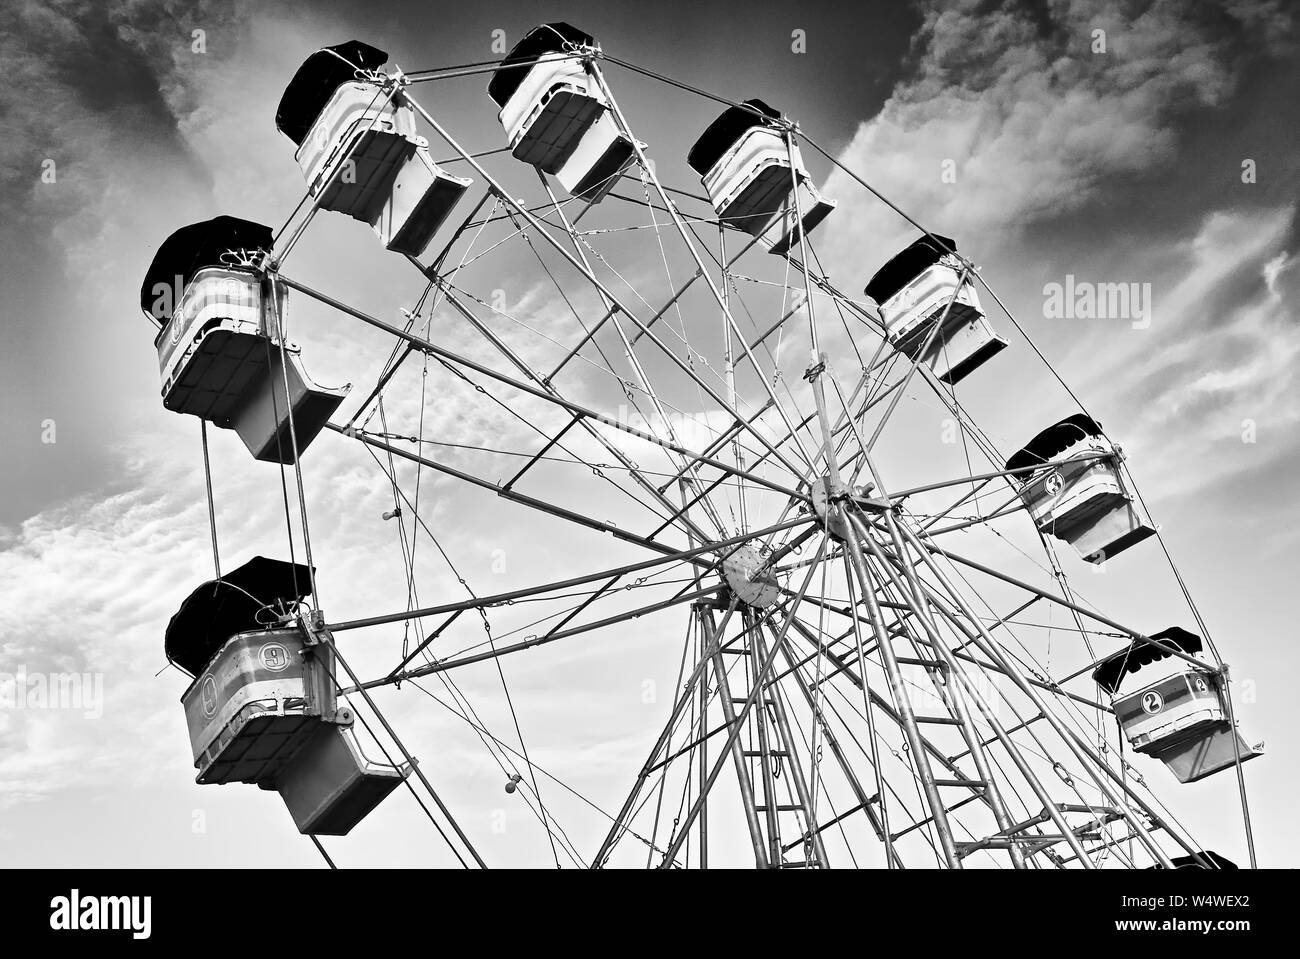 Retro style ferris wheel in black and white against a dramatic sky with clouds at a carnival in Cuertero town, Capiz Province, Philippines. Stock Photo